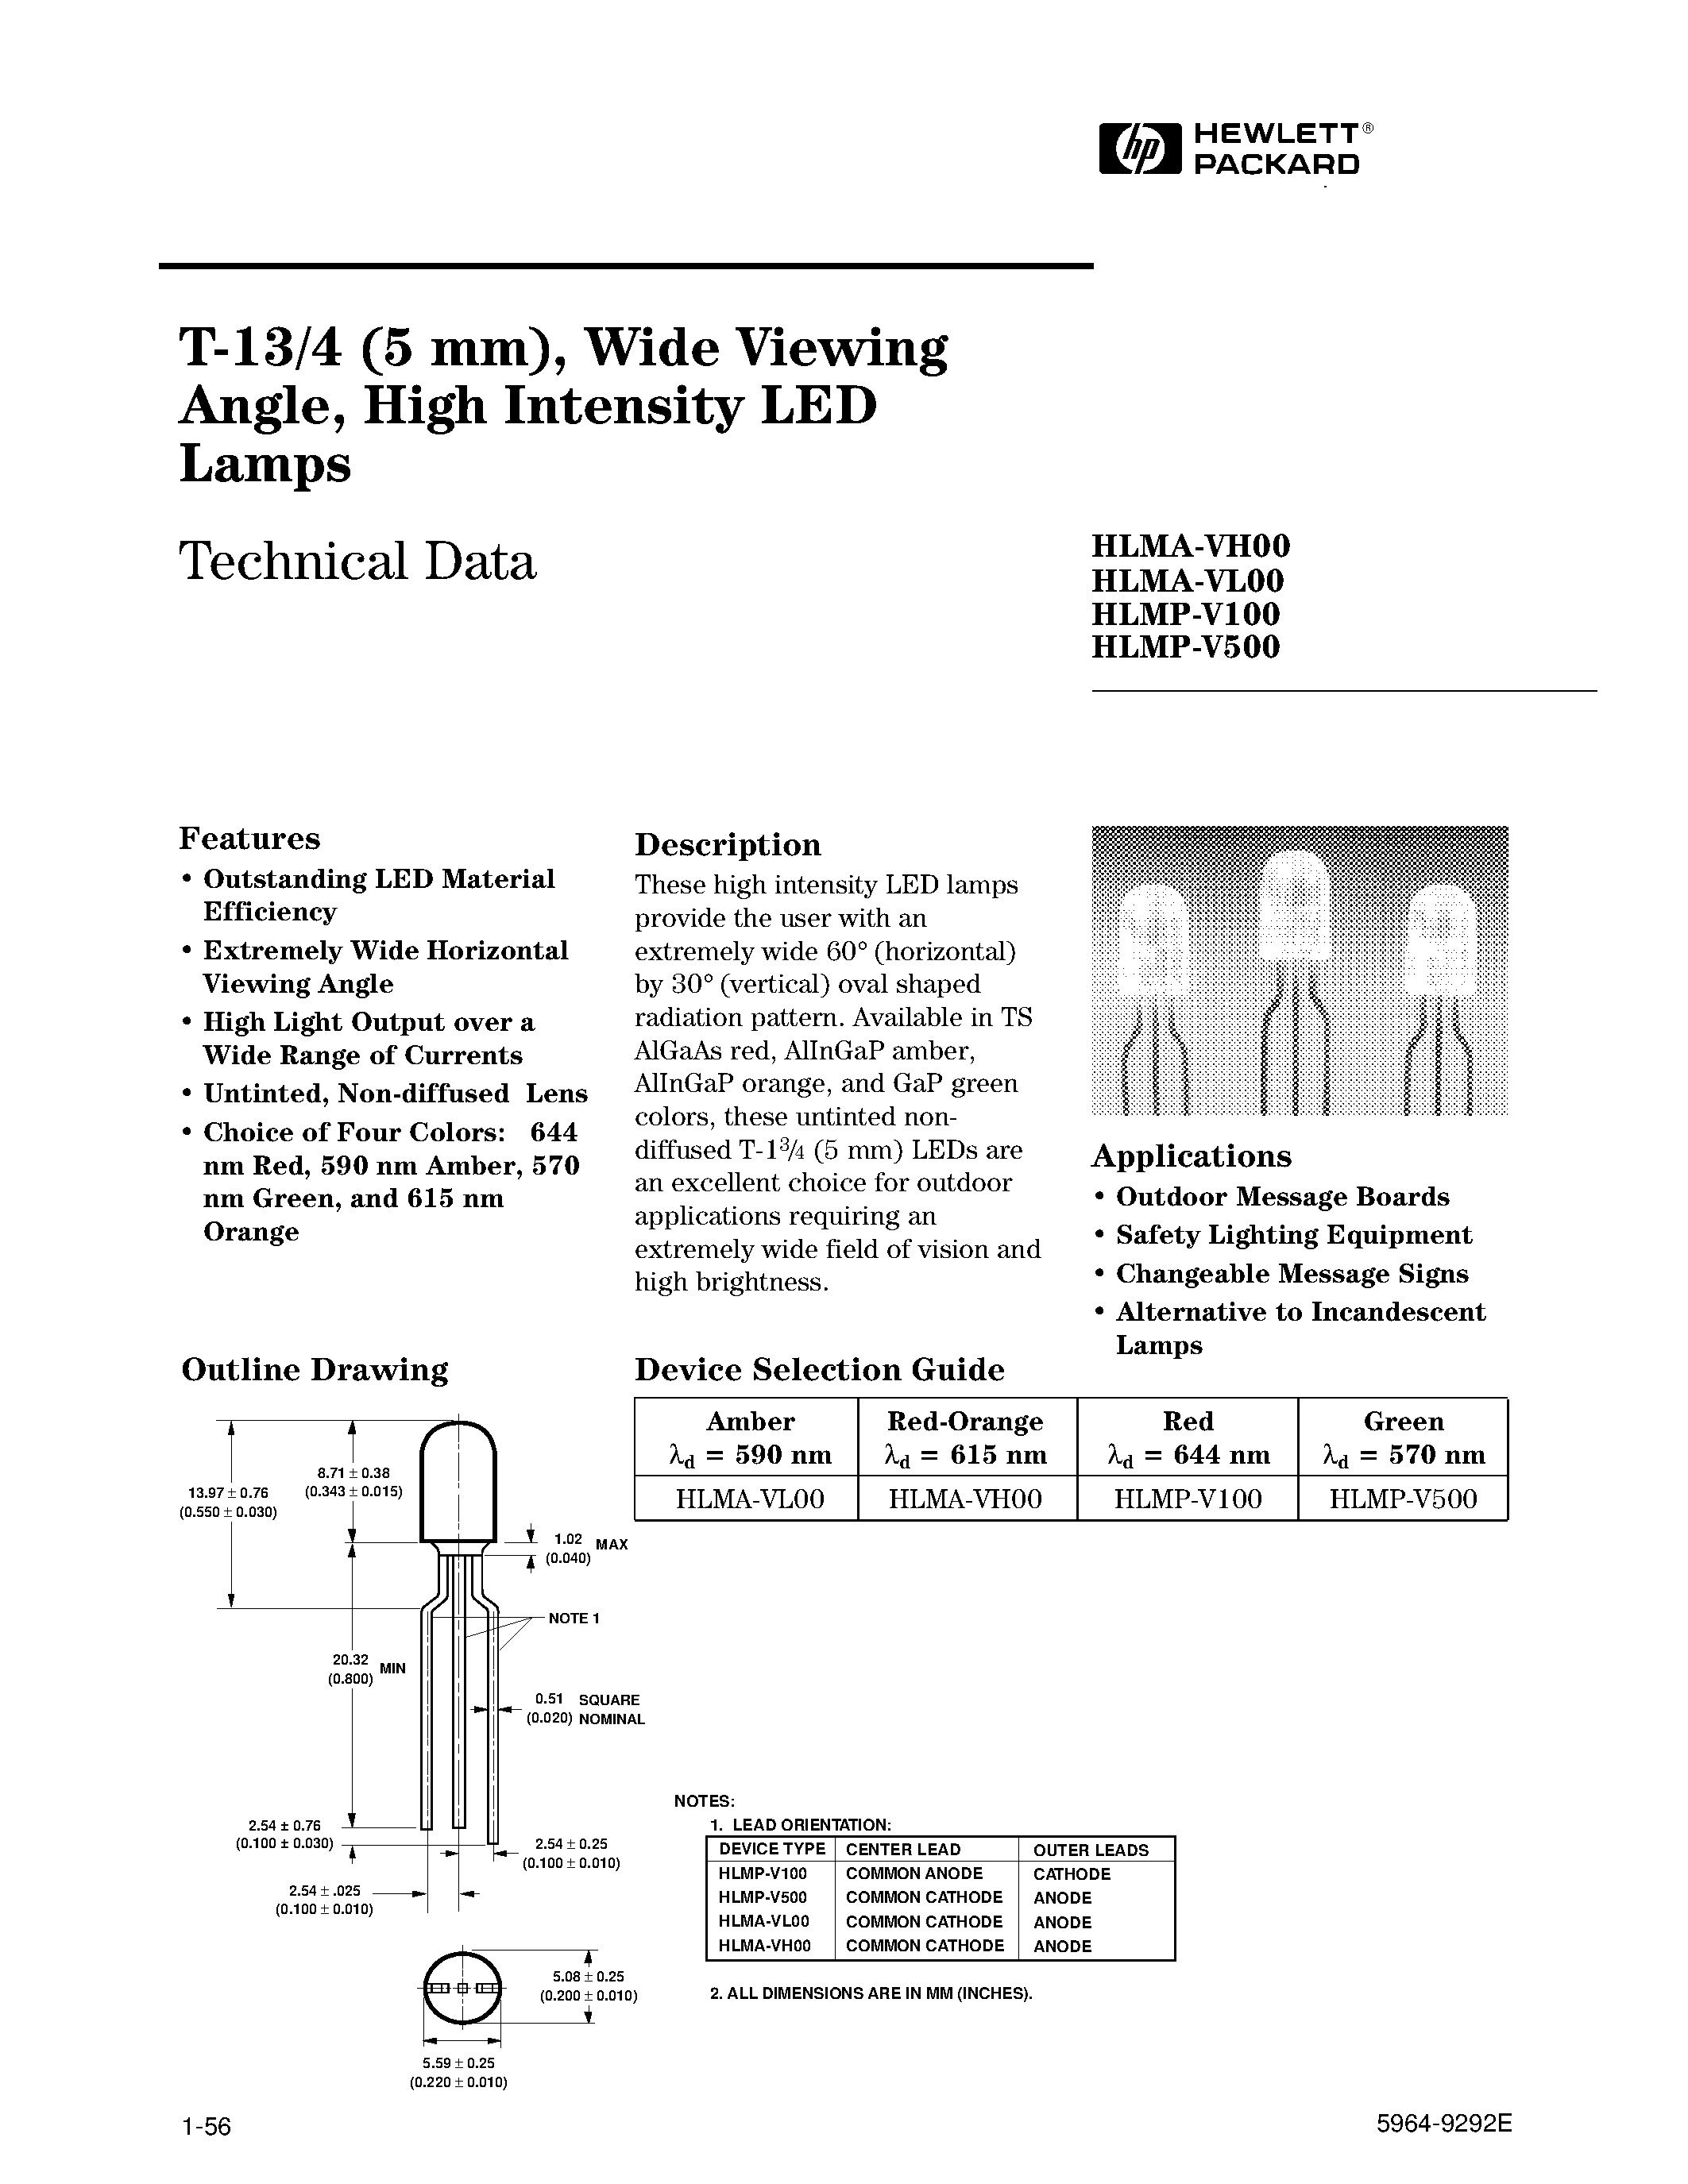 Datasheet HLMP-V100 - T-13/4 (5 mm)/ Wide Viewing Angle/ High Intensity LED Lamps page 1